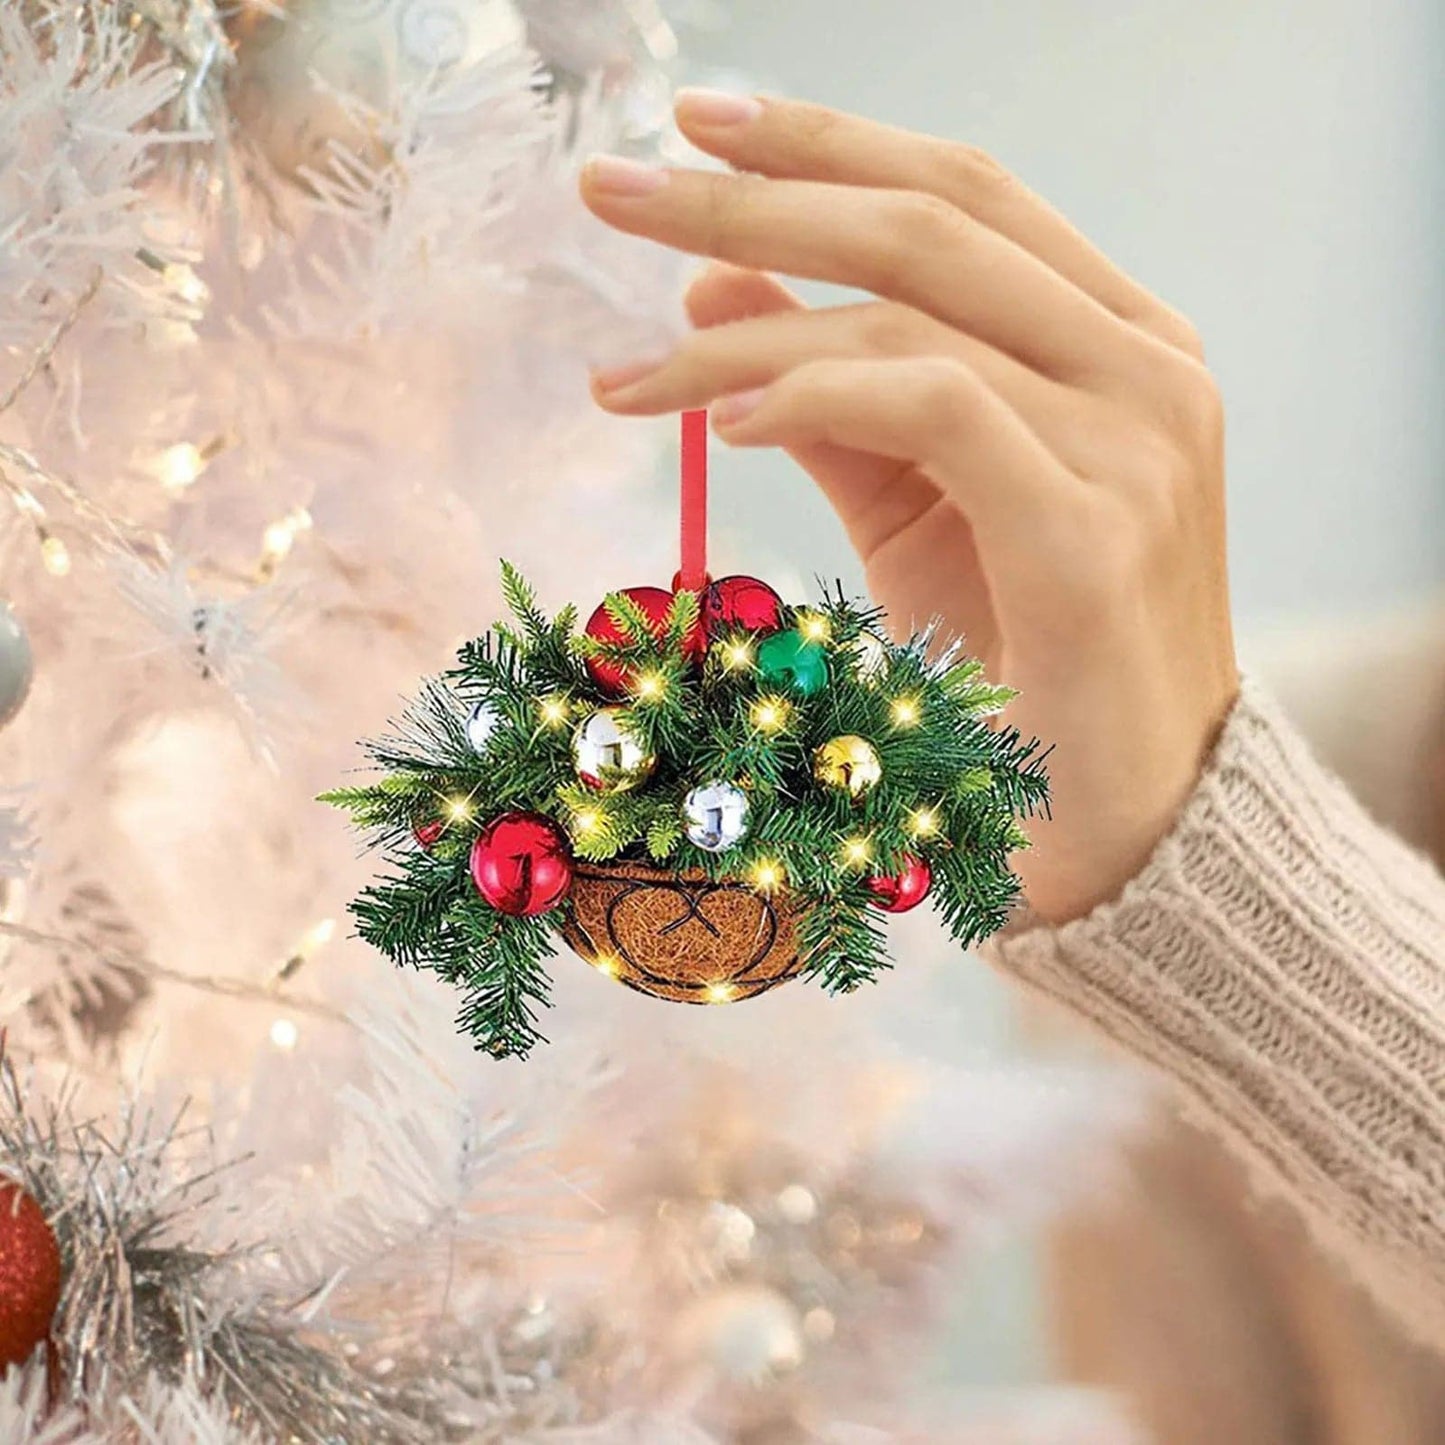 Artificial Hanging Flower Basket Christmas Pendant 2D Green Red Wreath Plant Xmas Tree Ornaments Merry Christmas Decoration Noel